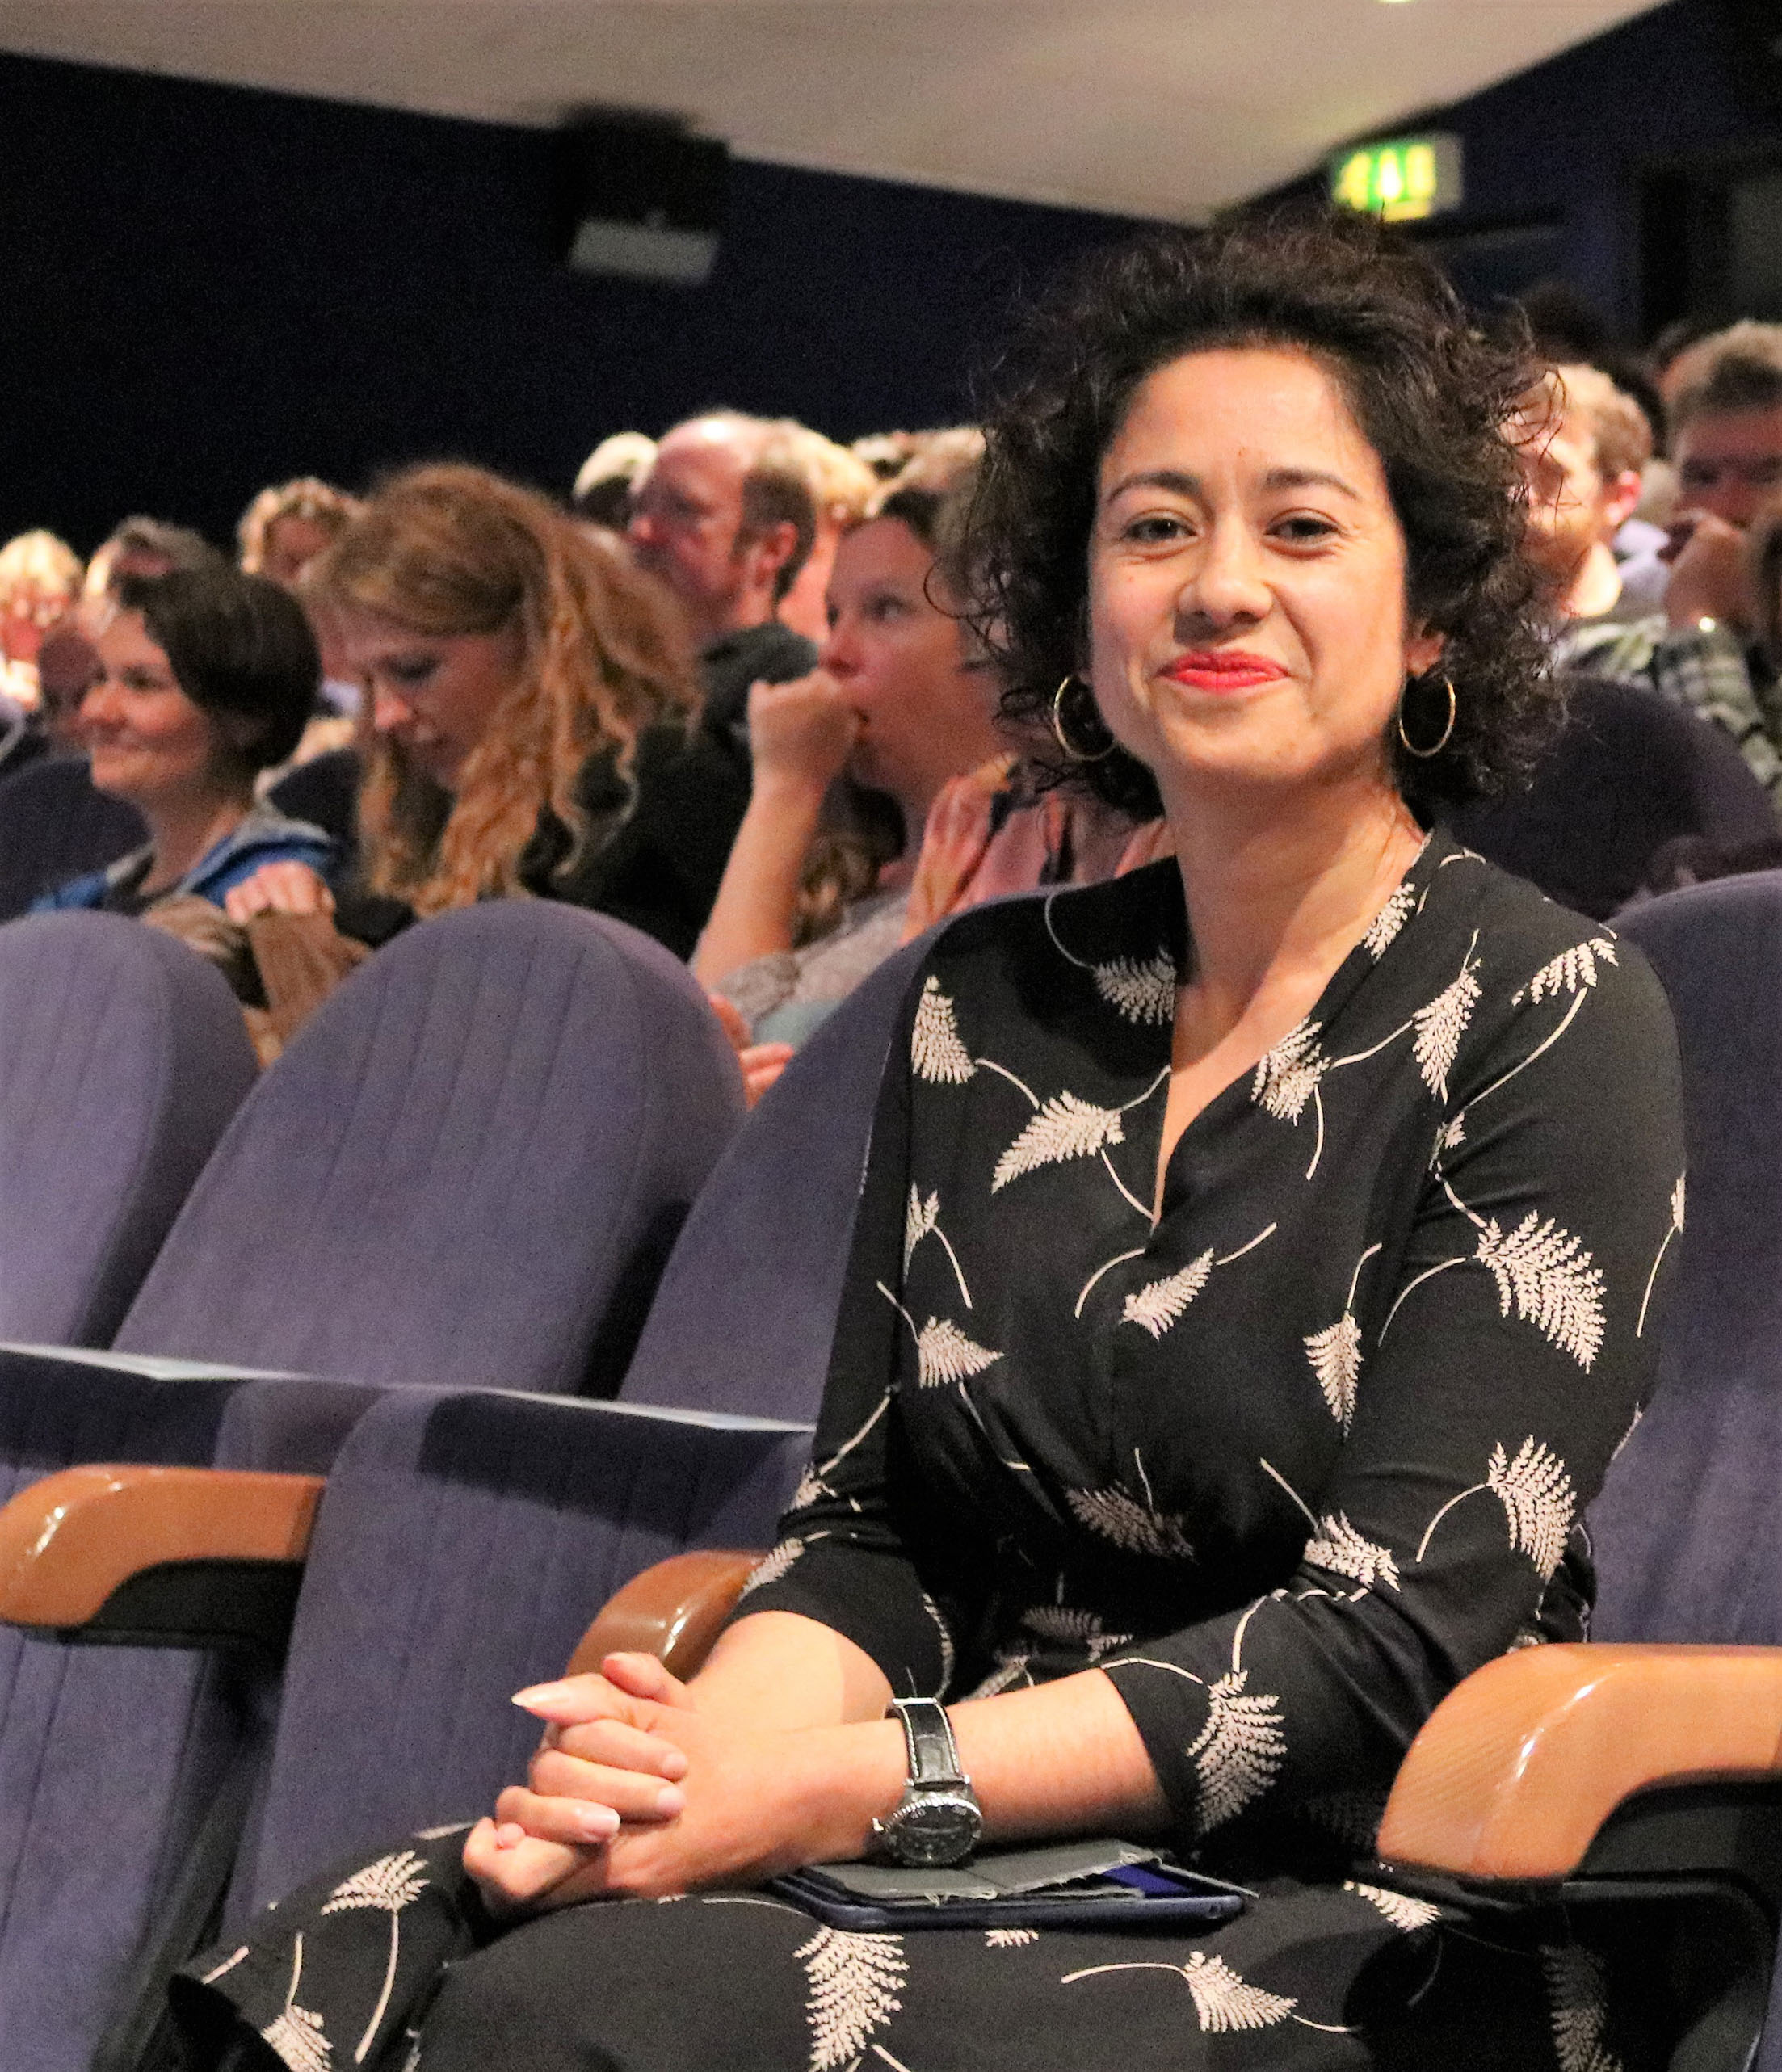 A portrait photograph of Samira Ahmed sitting in a blue auditorium seat, with other people sitting in the seats behind her